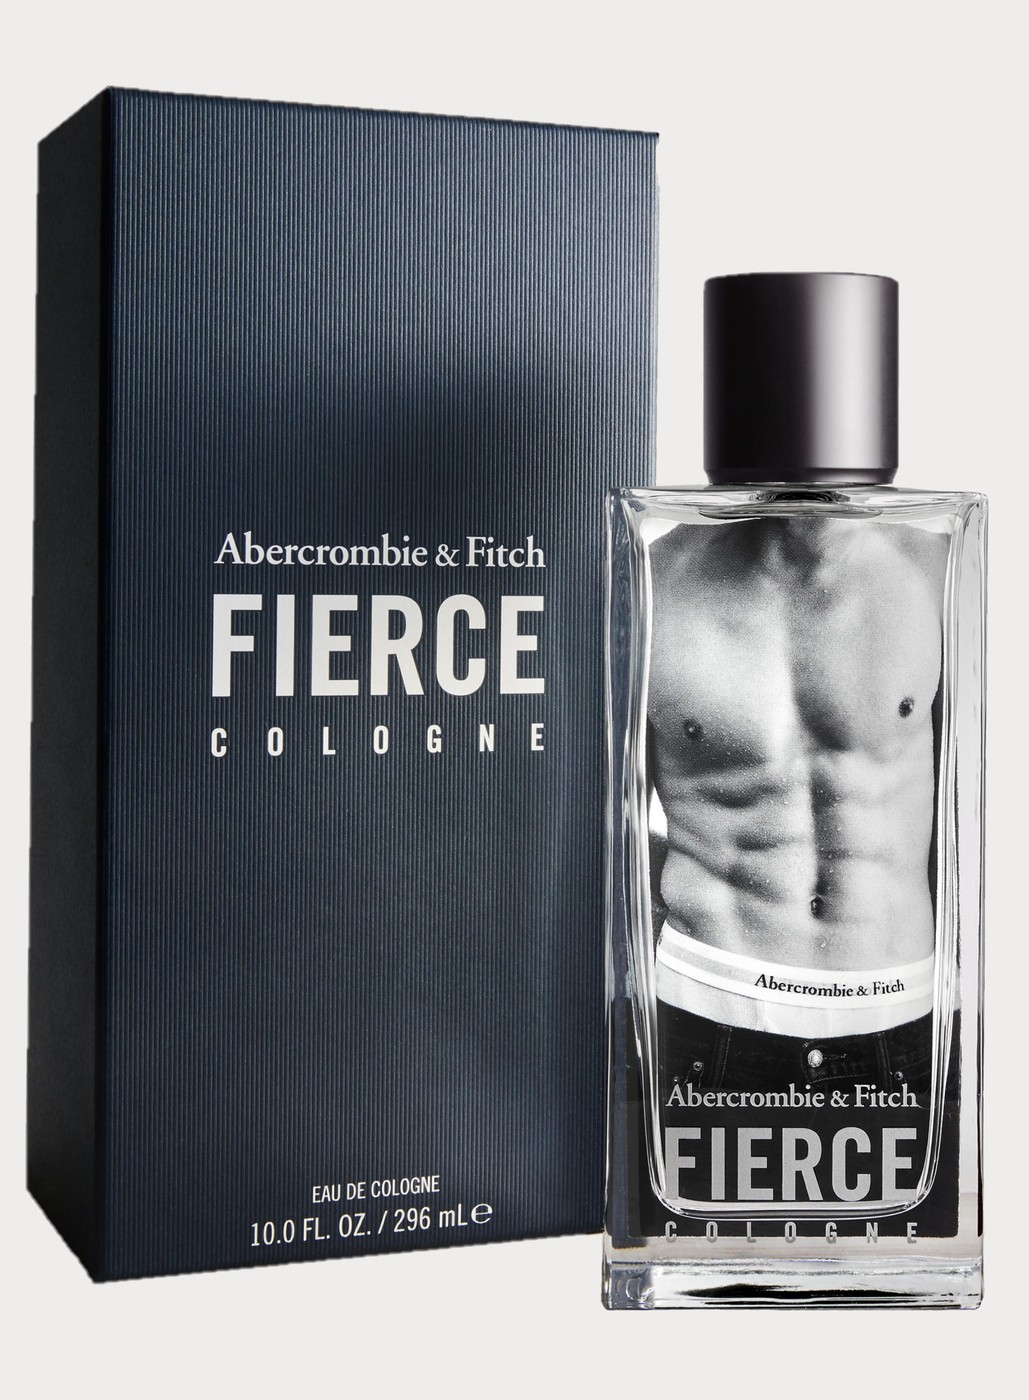 Парфюм Abercrombie & Fitch Fierce cologne 296 мл